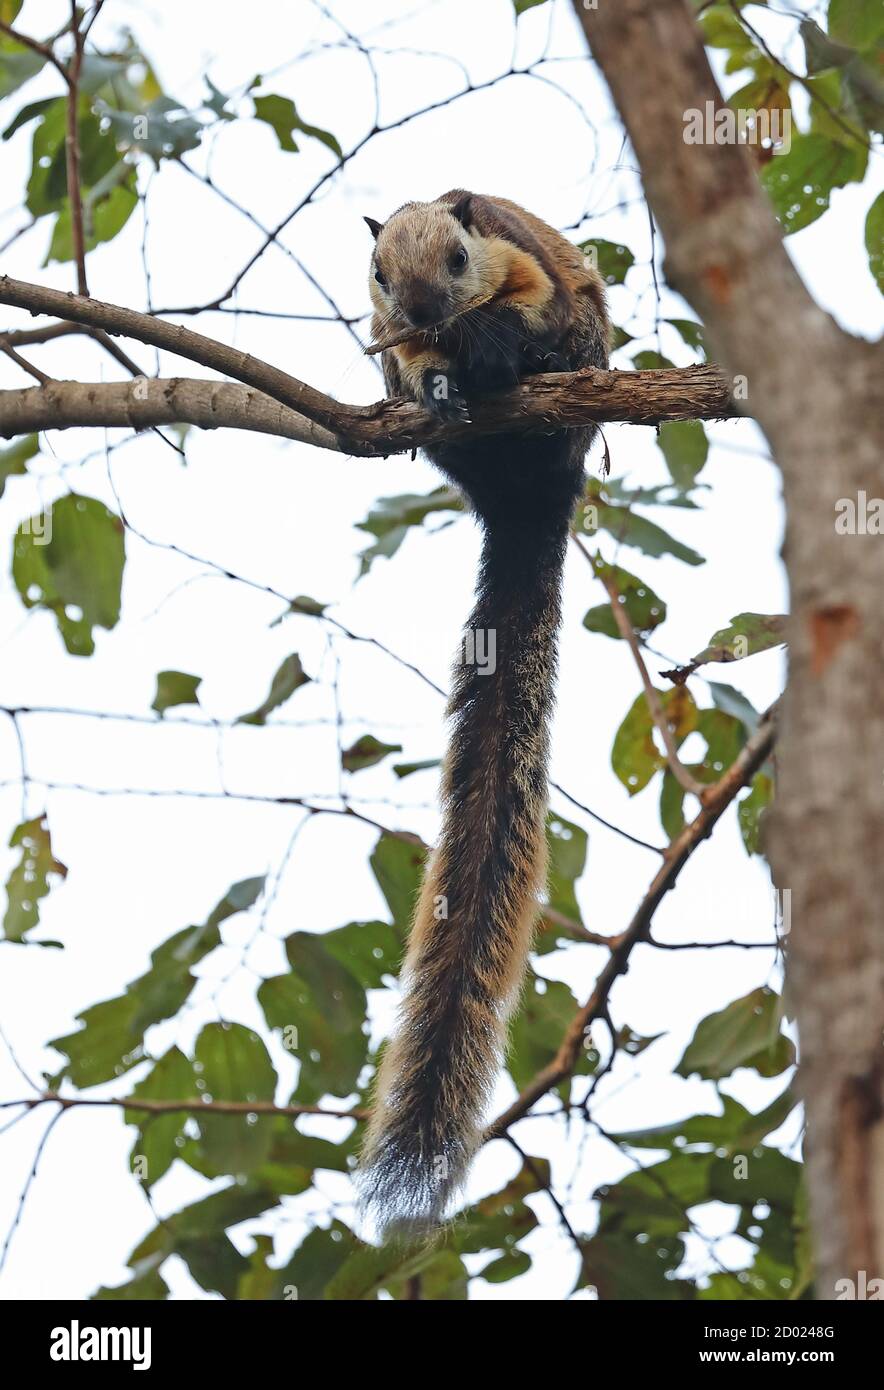 Black Giant Squirrel (Ratufa bicolor bicolor) adult on branch with stick in mouth  Bali Barat NP, Bali, Indonesia         July Stock Photo